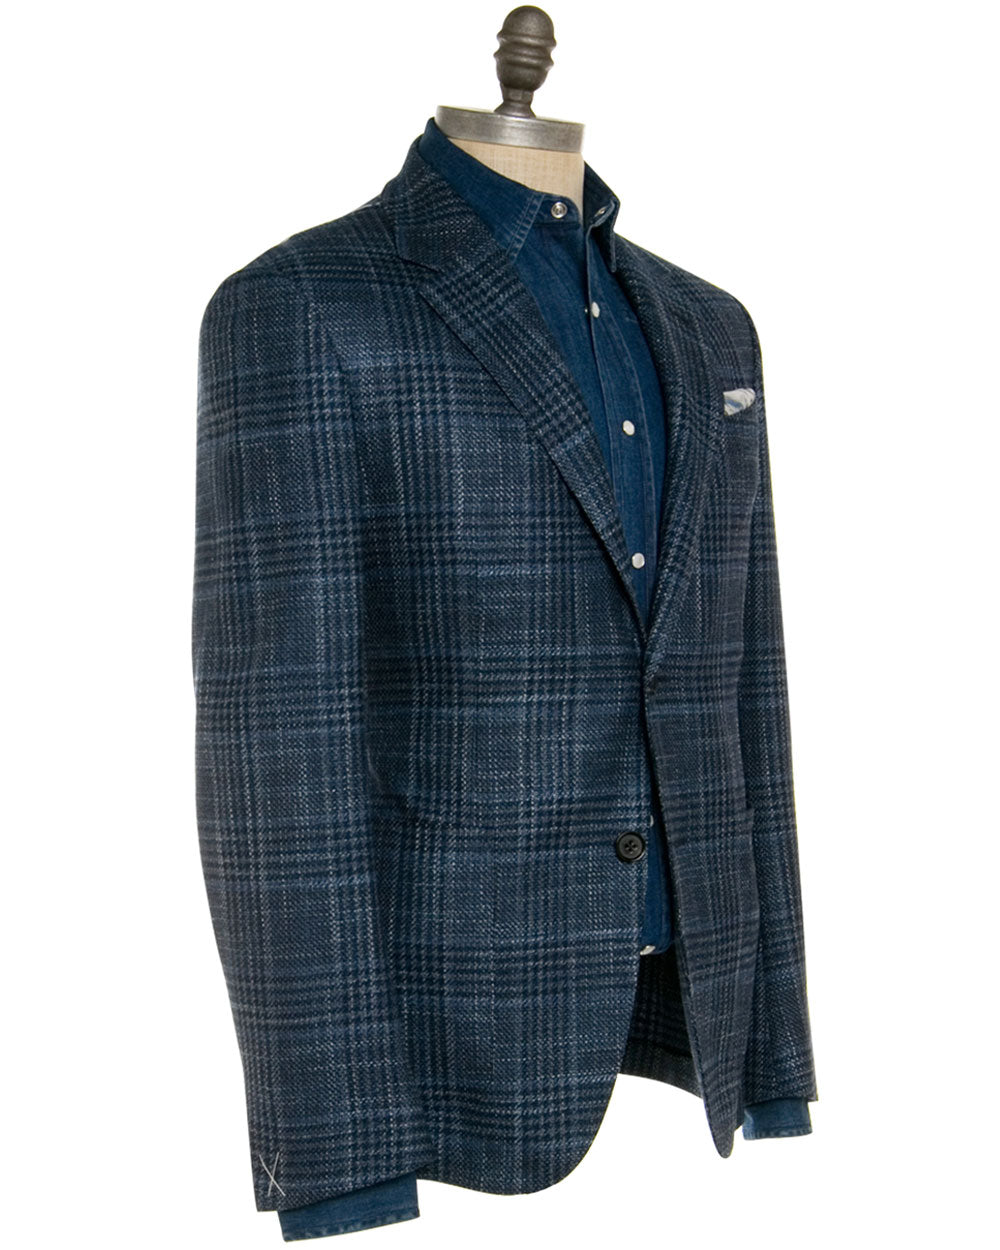 Blue and Navy Windowpane Sportcoat